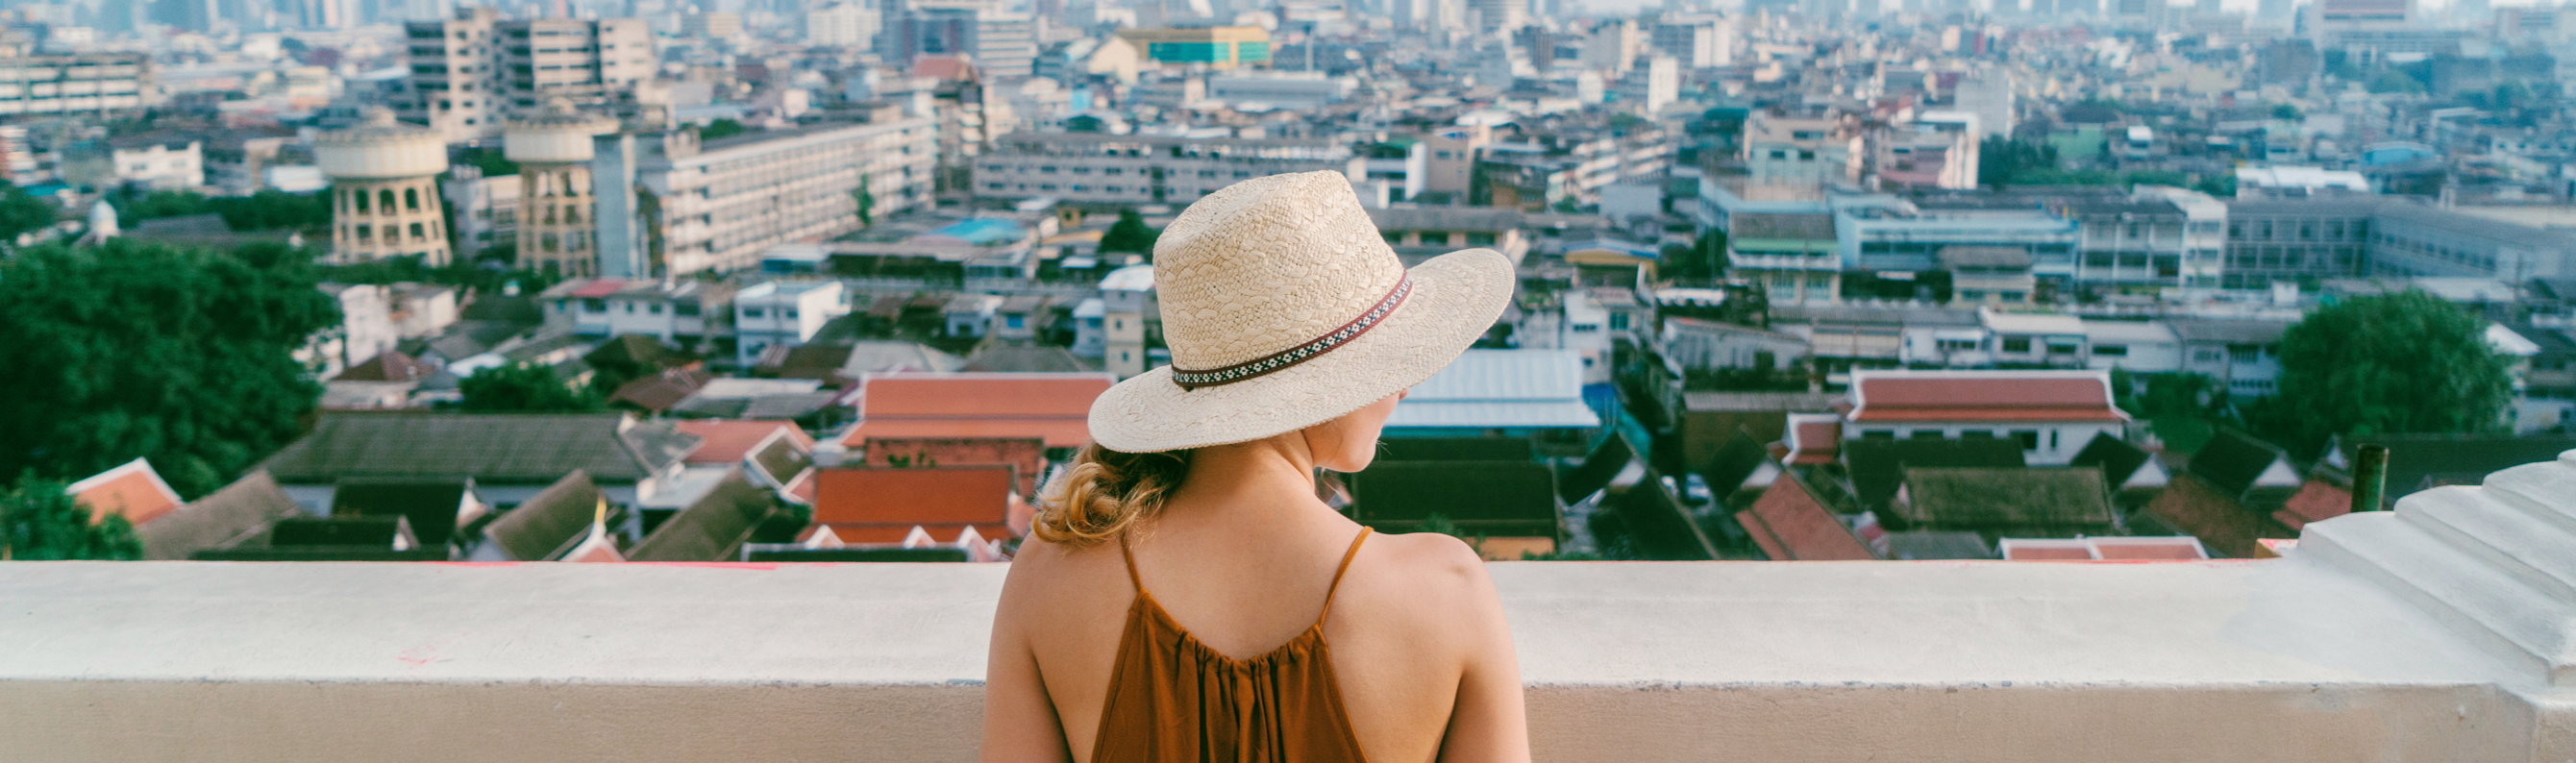 Woman in hat overlooking a dense city.